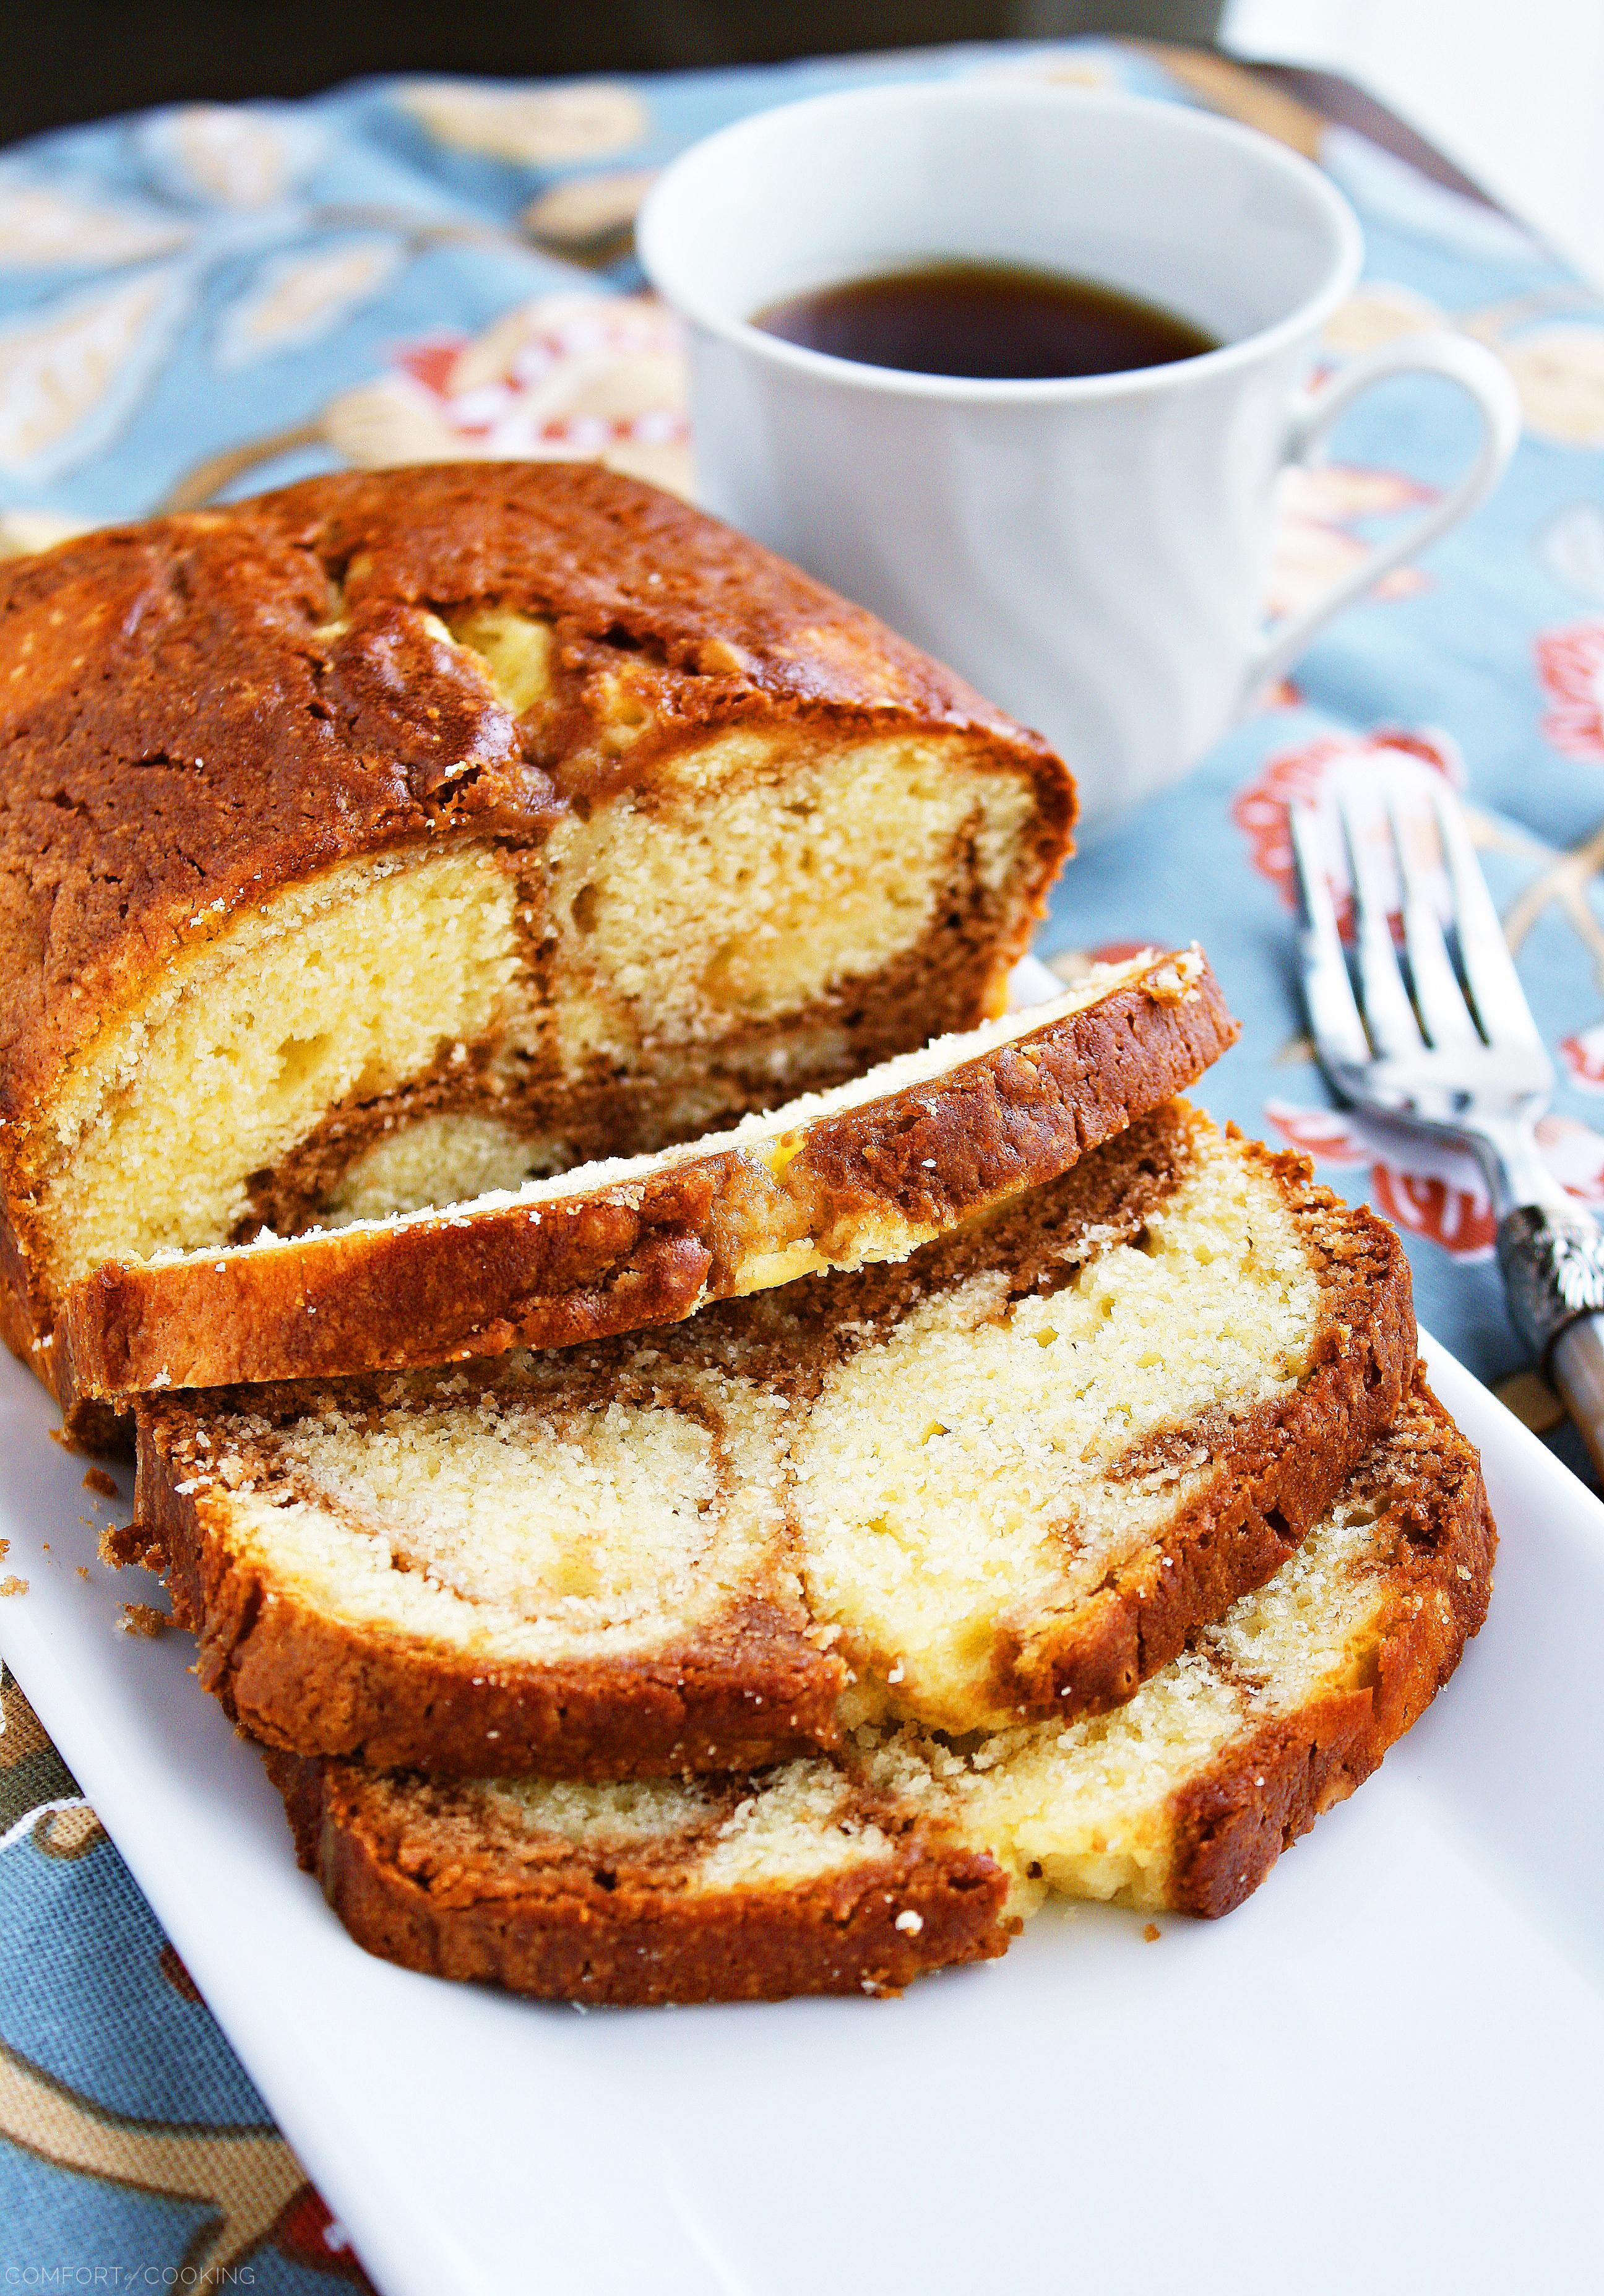 Chocolate-Vanilla Marbled Bread – The Comfort of Cooking